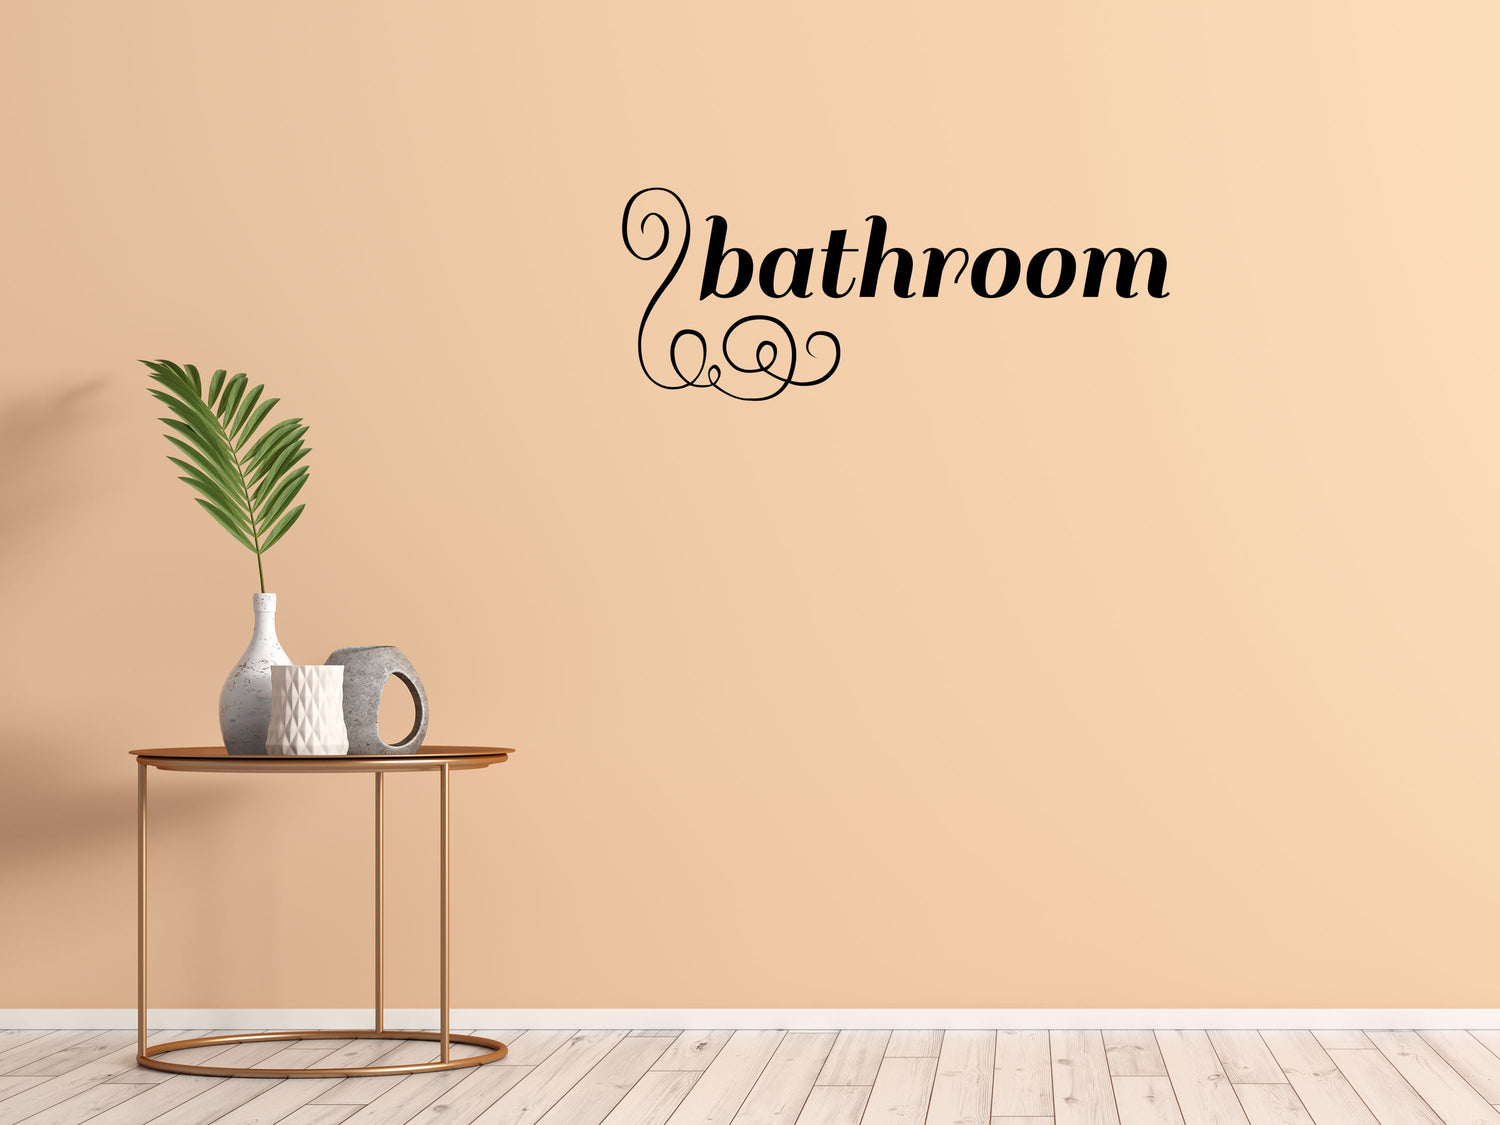 Bathroom Sign Decal Wall Stickers - Inspirational Wall Decals Vinyl Wall Decal Done 